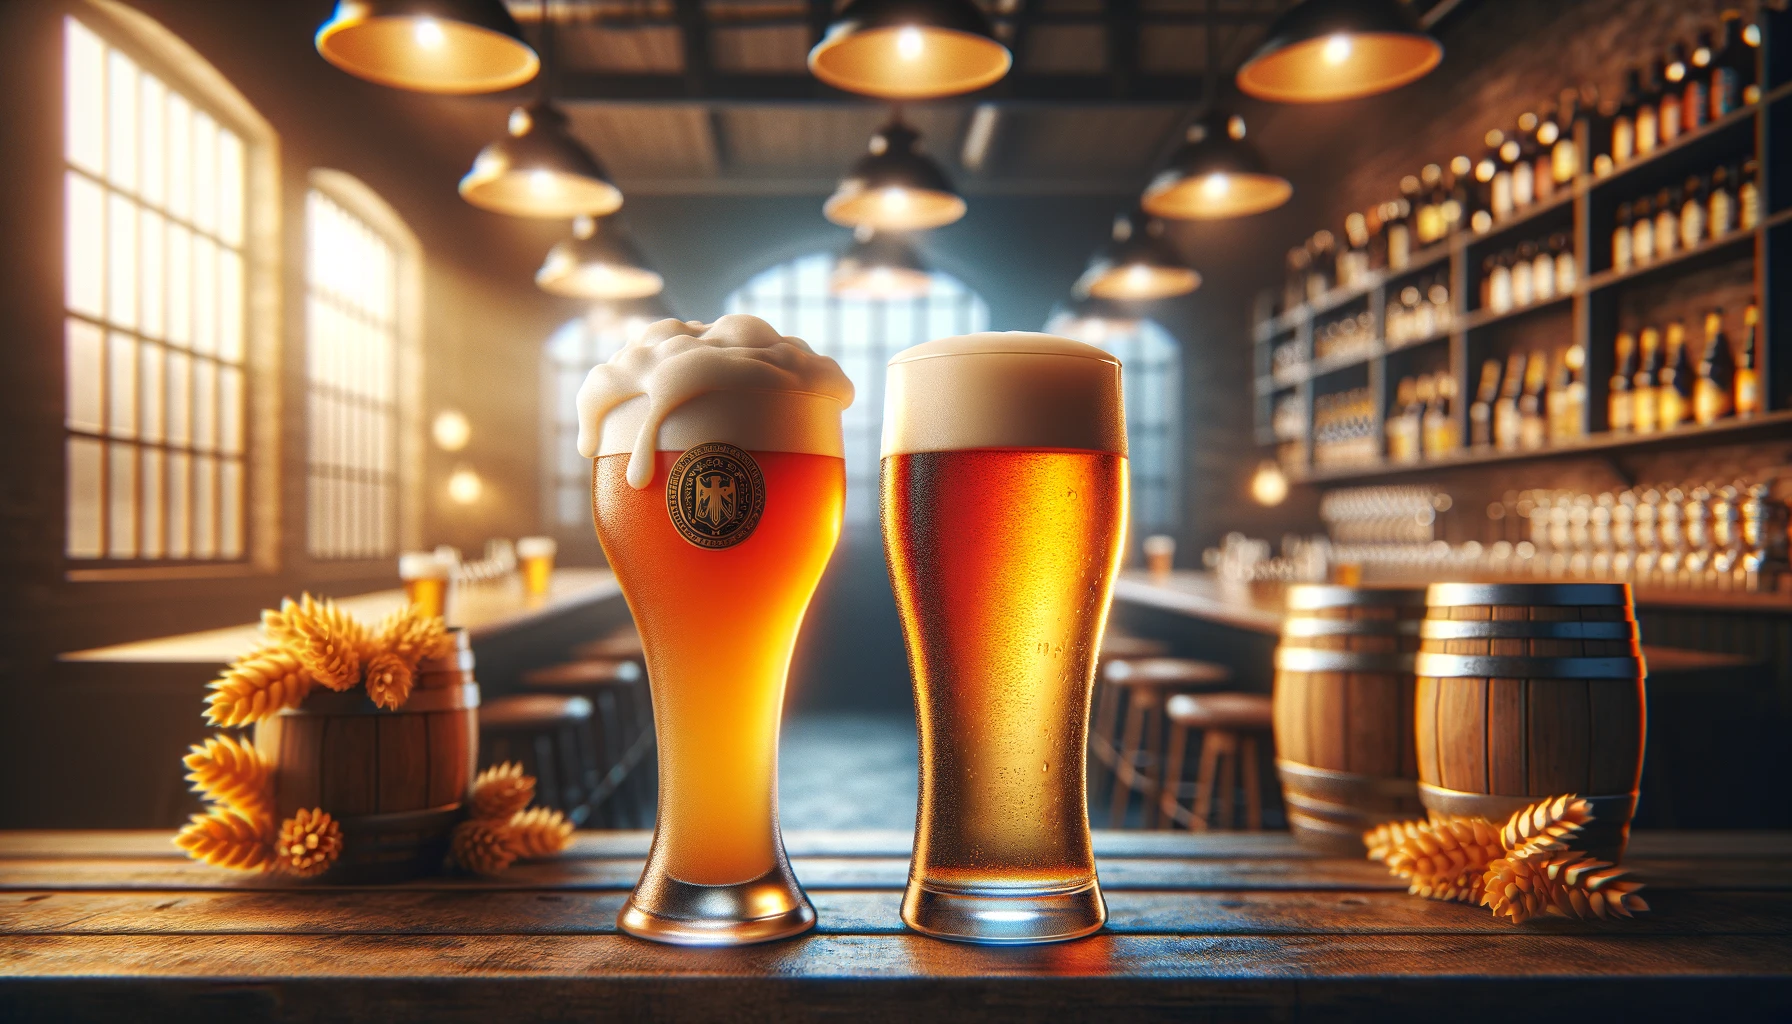 image featuring a side-by-side comparison of a German wheat beer in a traditional weizen glass and an American wheat beer in a pint g